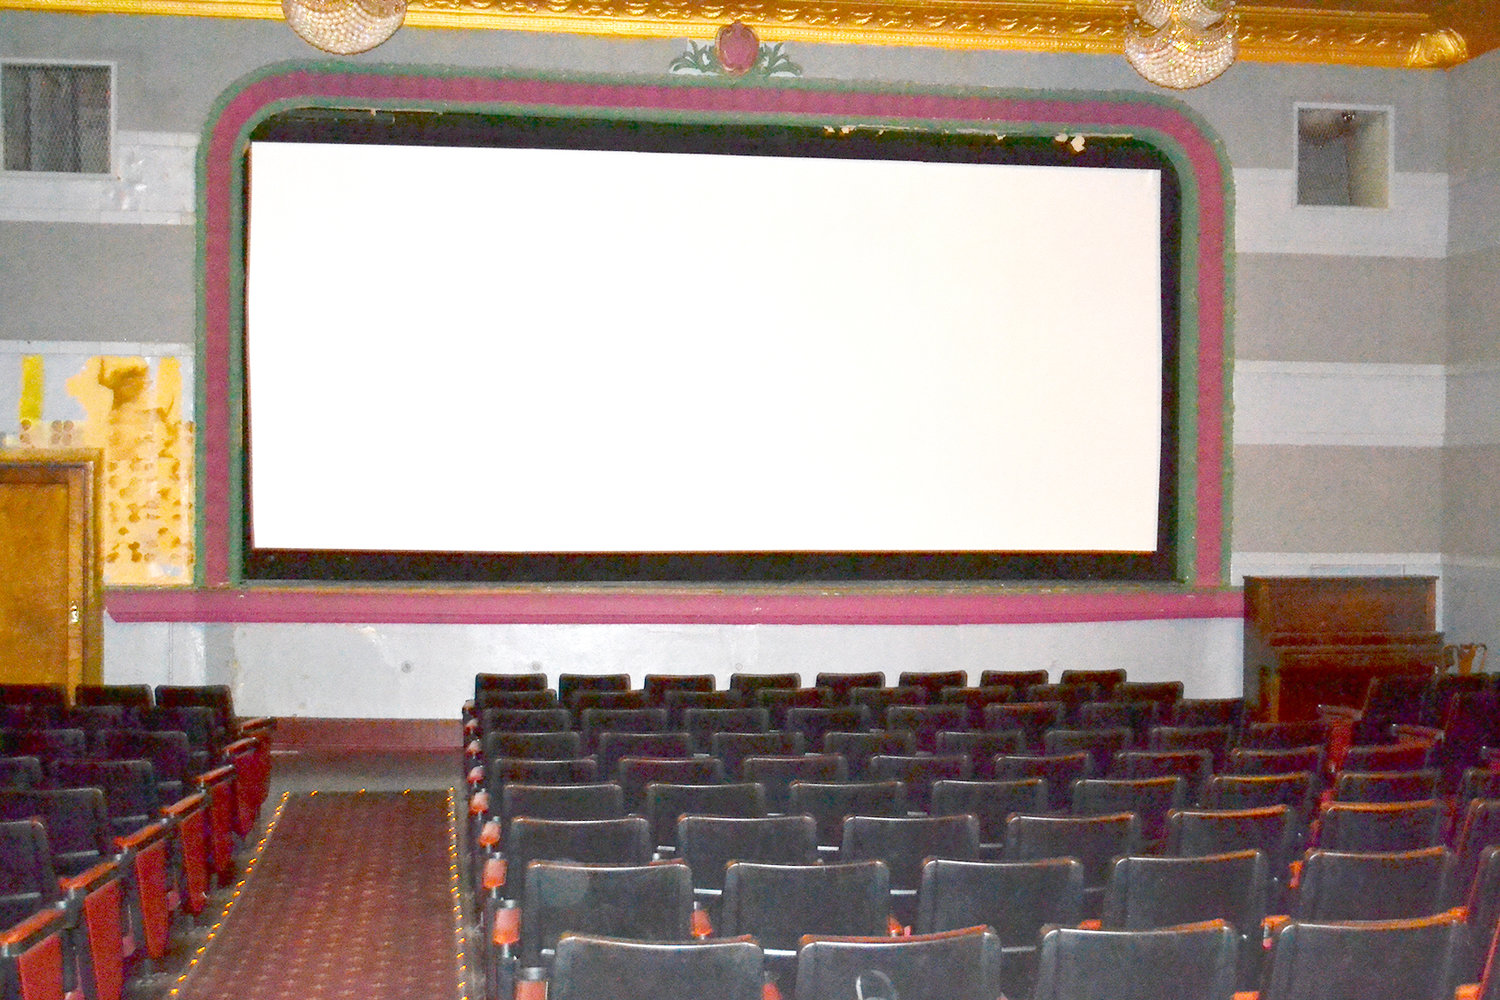 The New Strand Theatre has a single movie screen and stage. The theater seats 230 people and has showings Friday night, matinees Saturday and Sunday and evening showings Saturday nights.